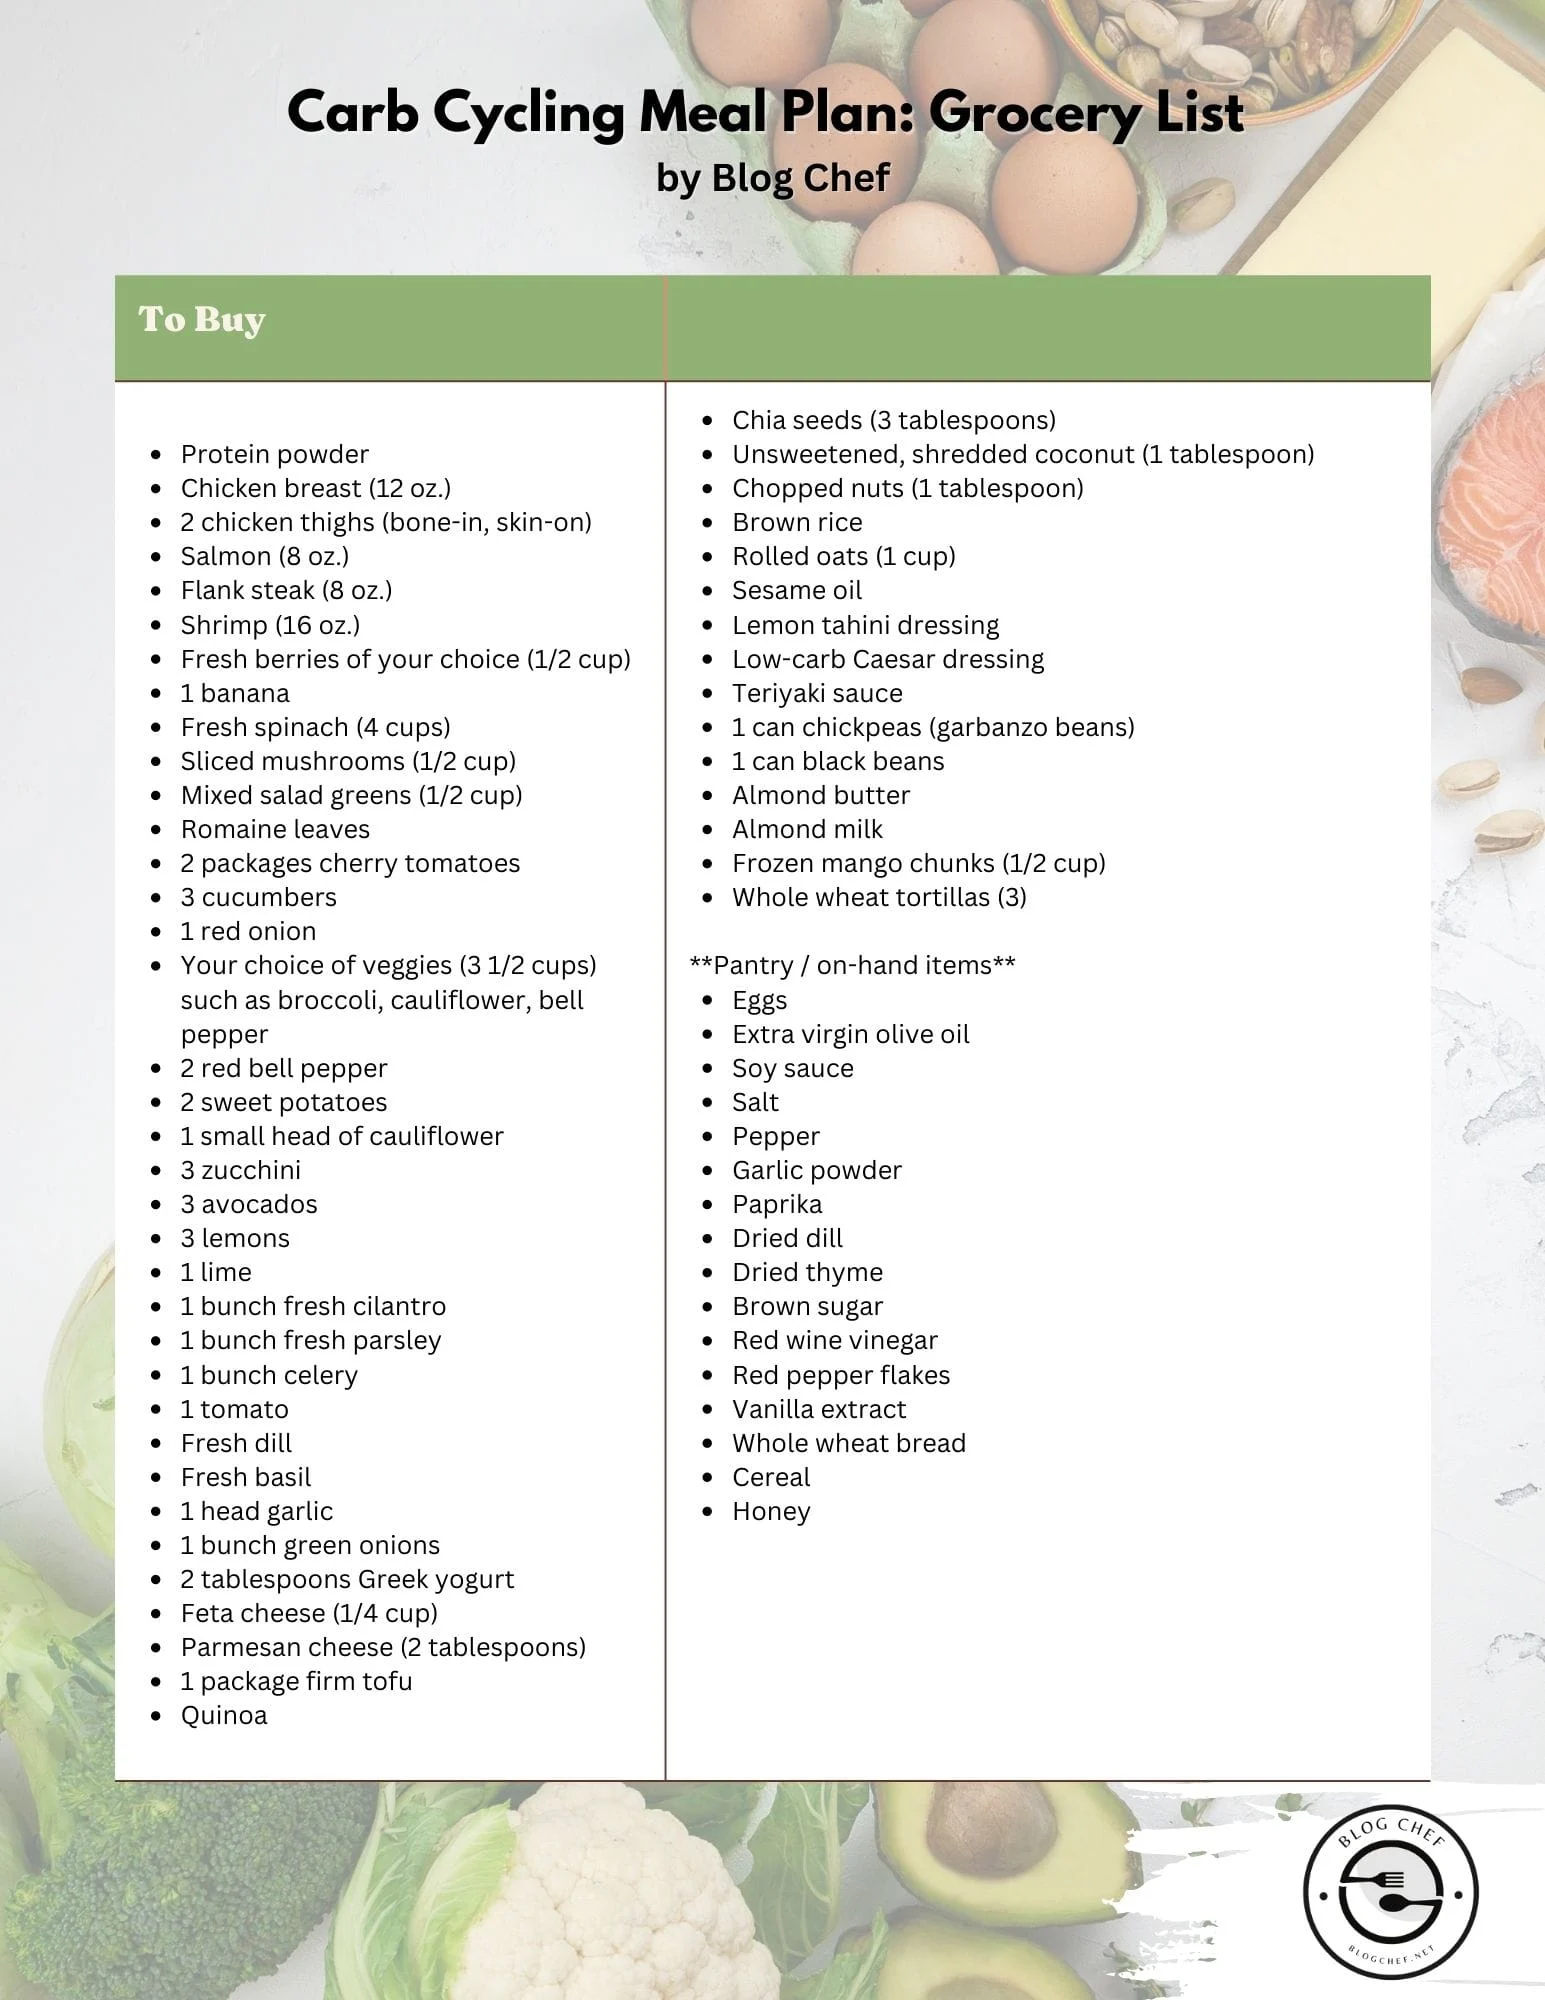 Grocery list for carb cycling meal plan.